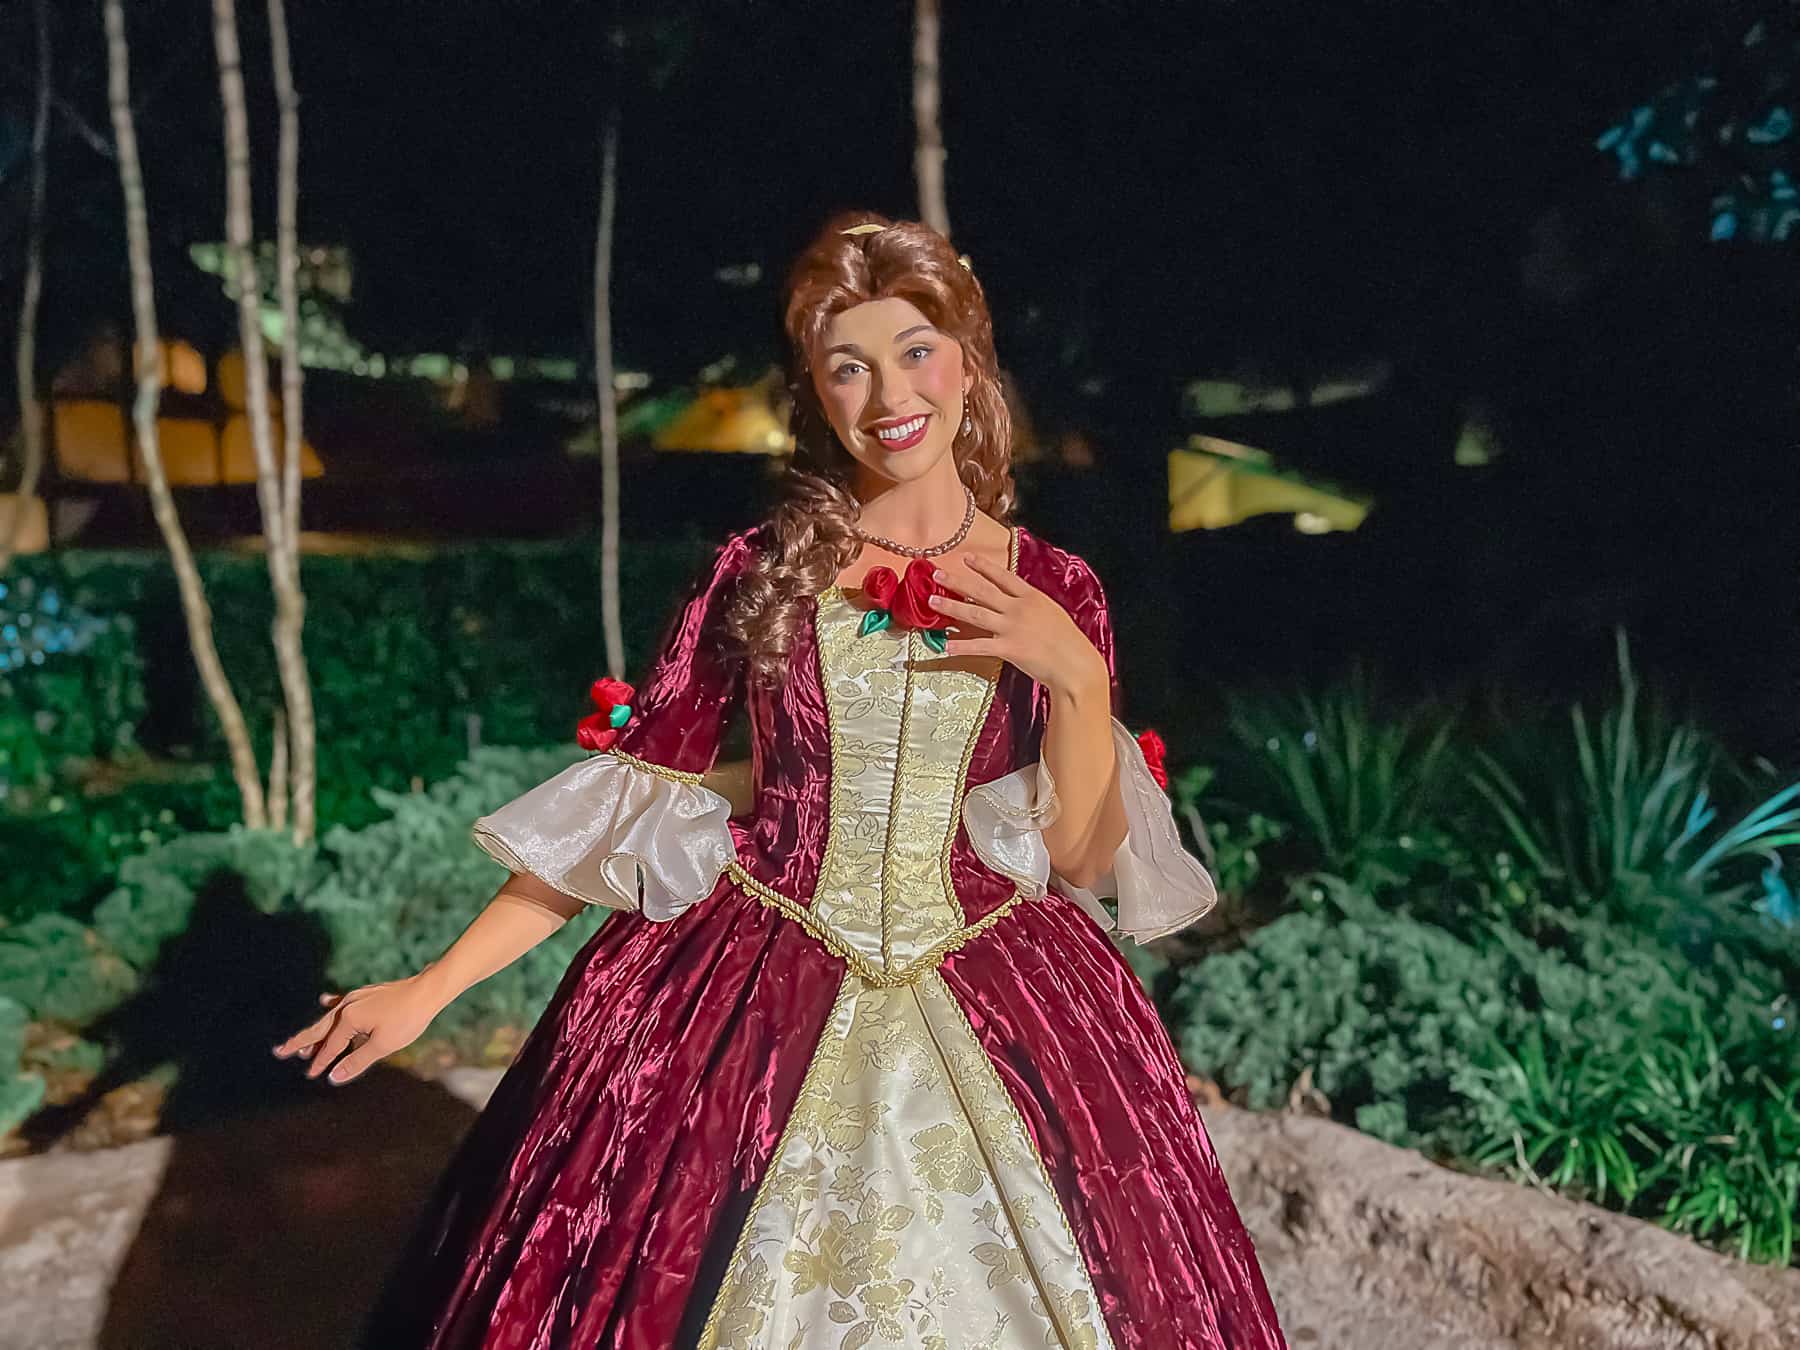 Belle in her holiday dress at Mickey's Very Merry Christmas Party 